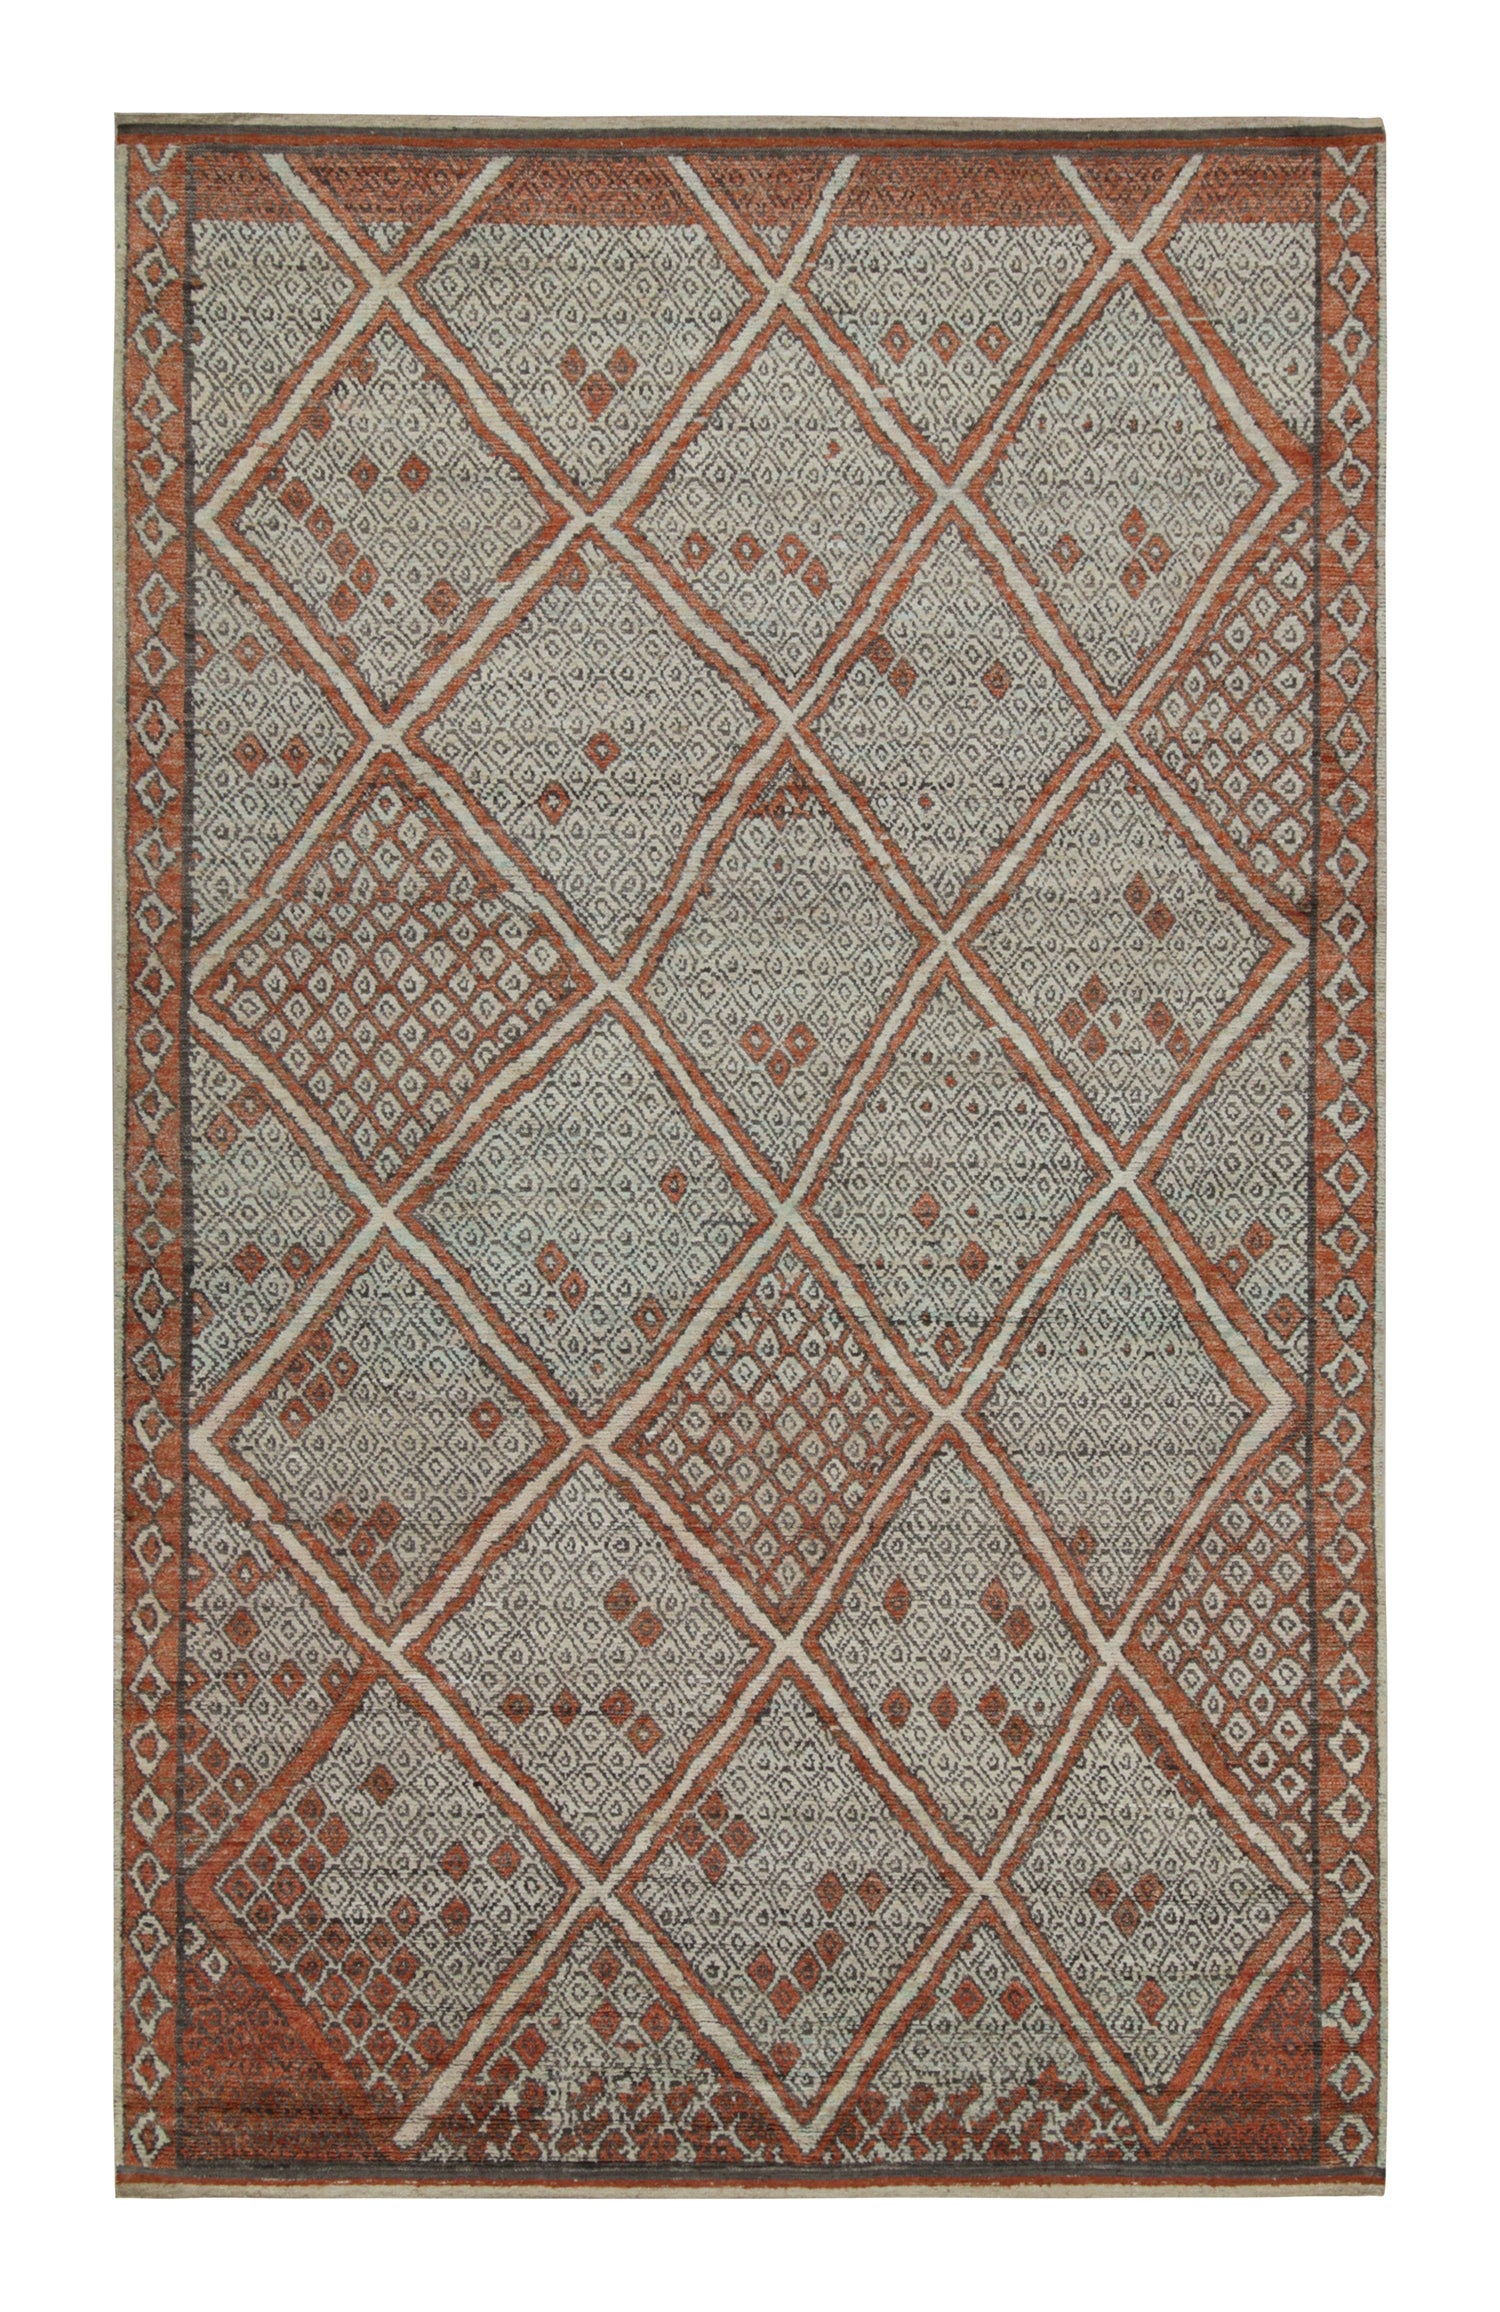 Rug & Kilim’s Moroccan Style Rug in Auburn Red and Gray Diamond Patterns